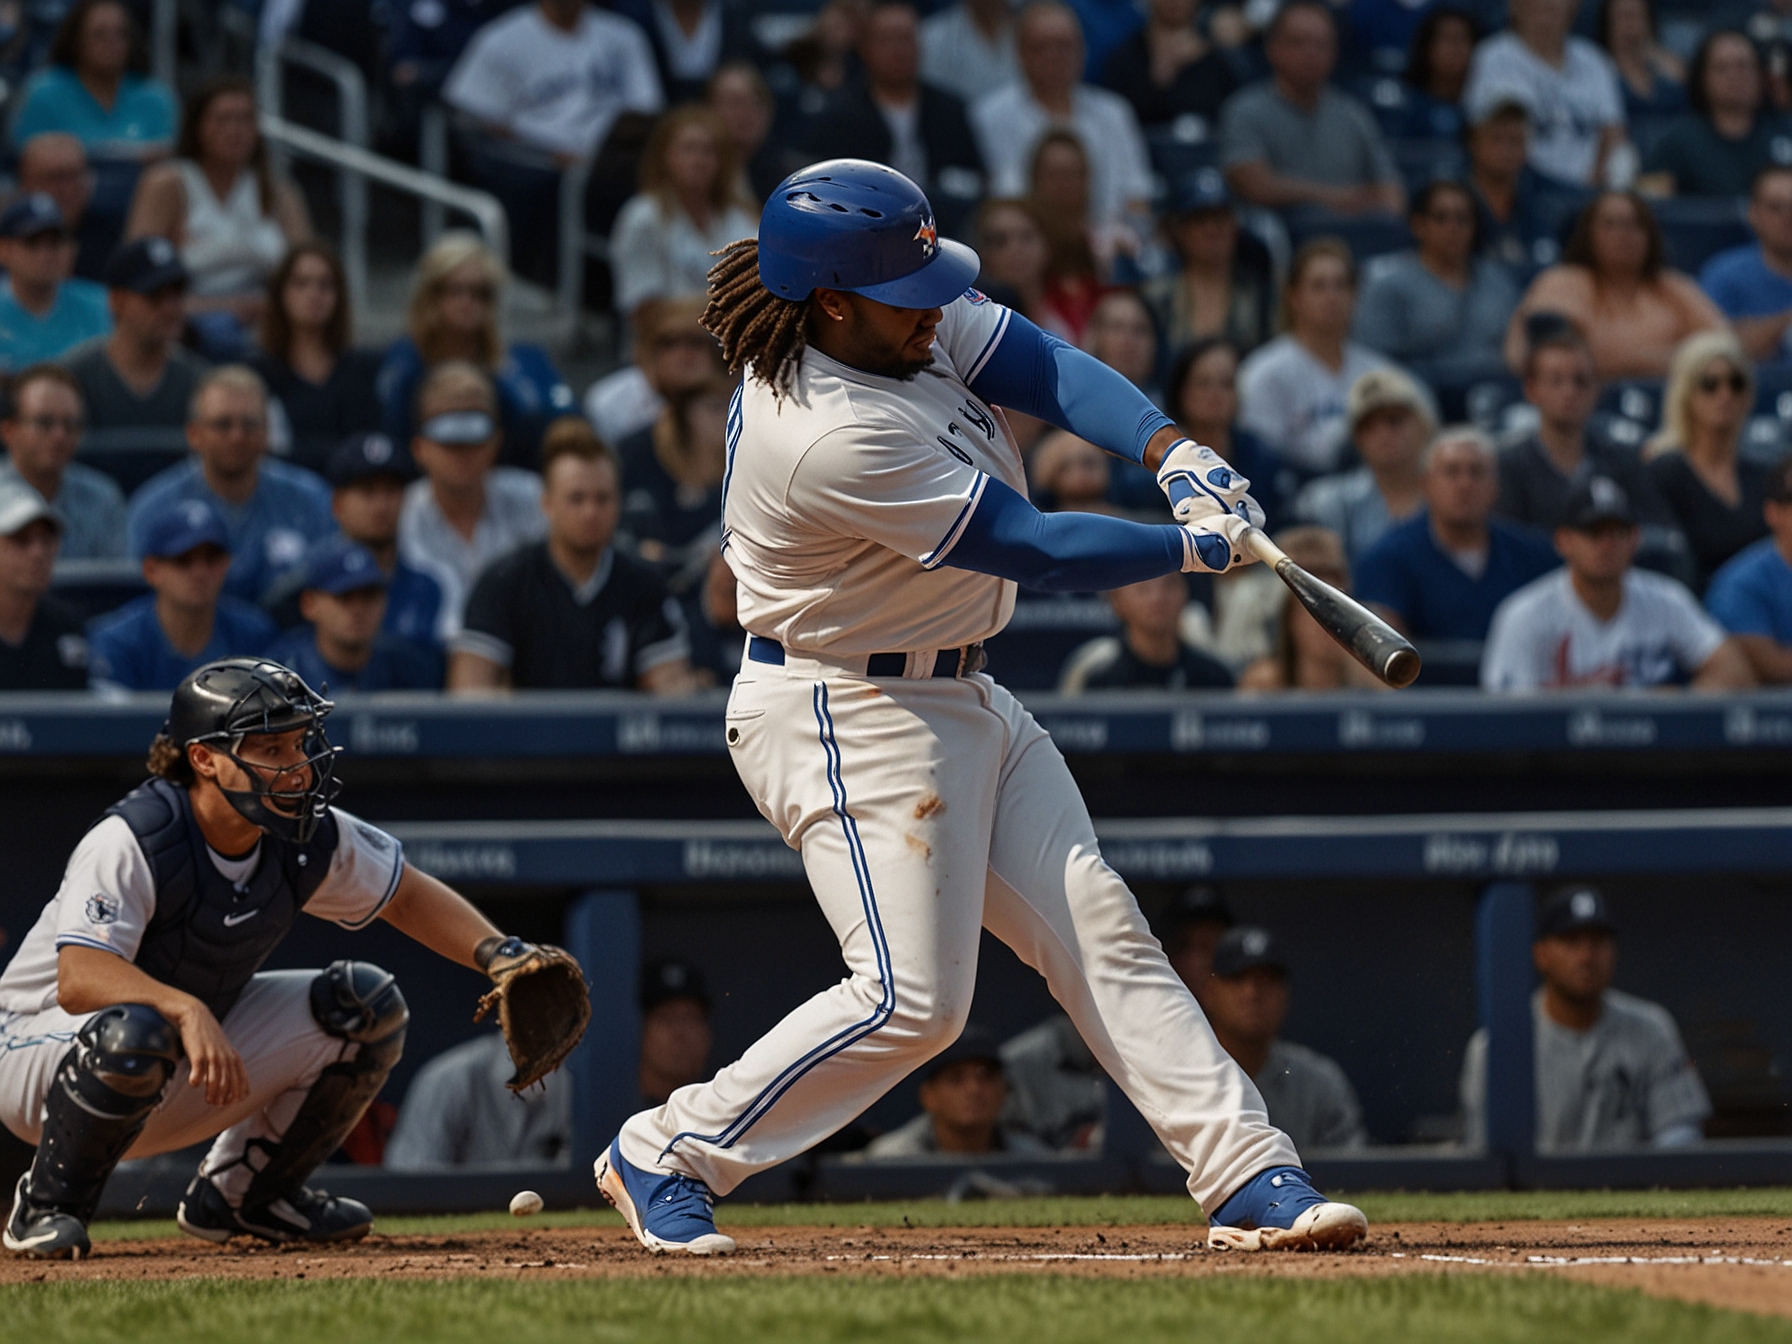 Vladimir Guerrero Jr. swinging powerfully at the plate during the Toronto Blue Jays vs. New York Yankees game, where he achieved six RBIs, igniting the offense in their 9-3 victory.